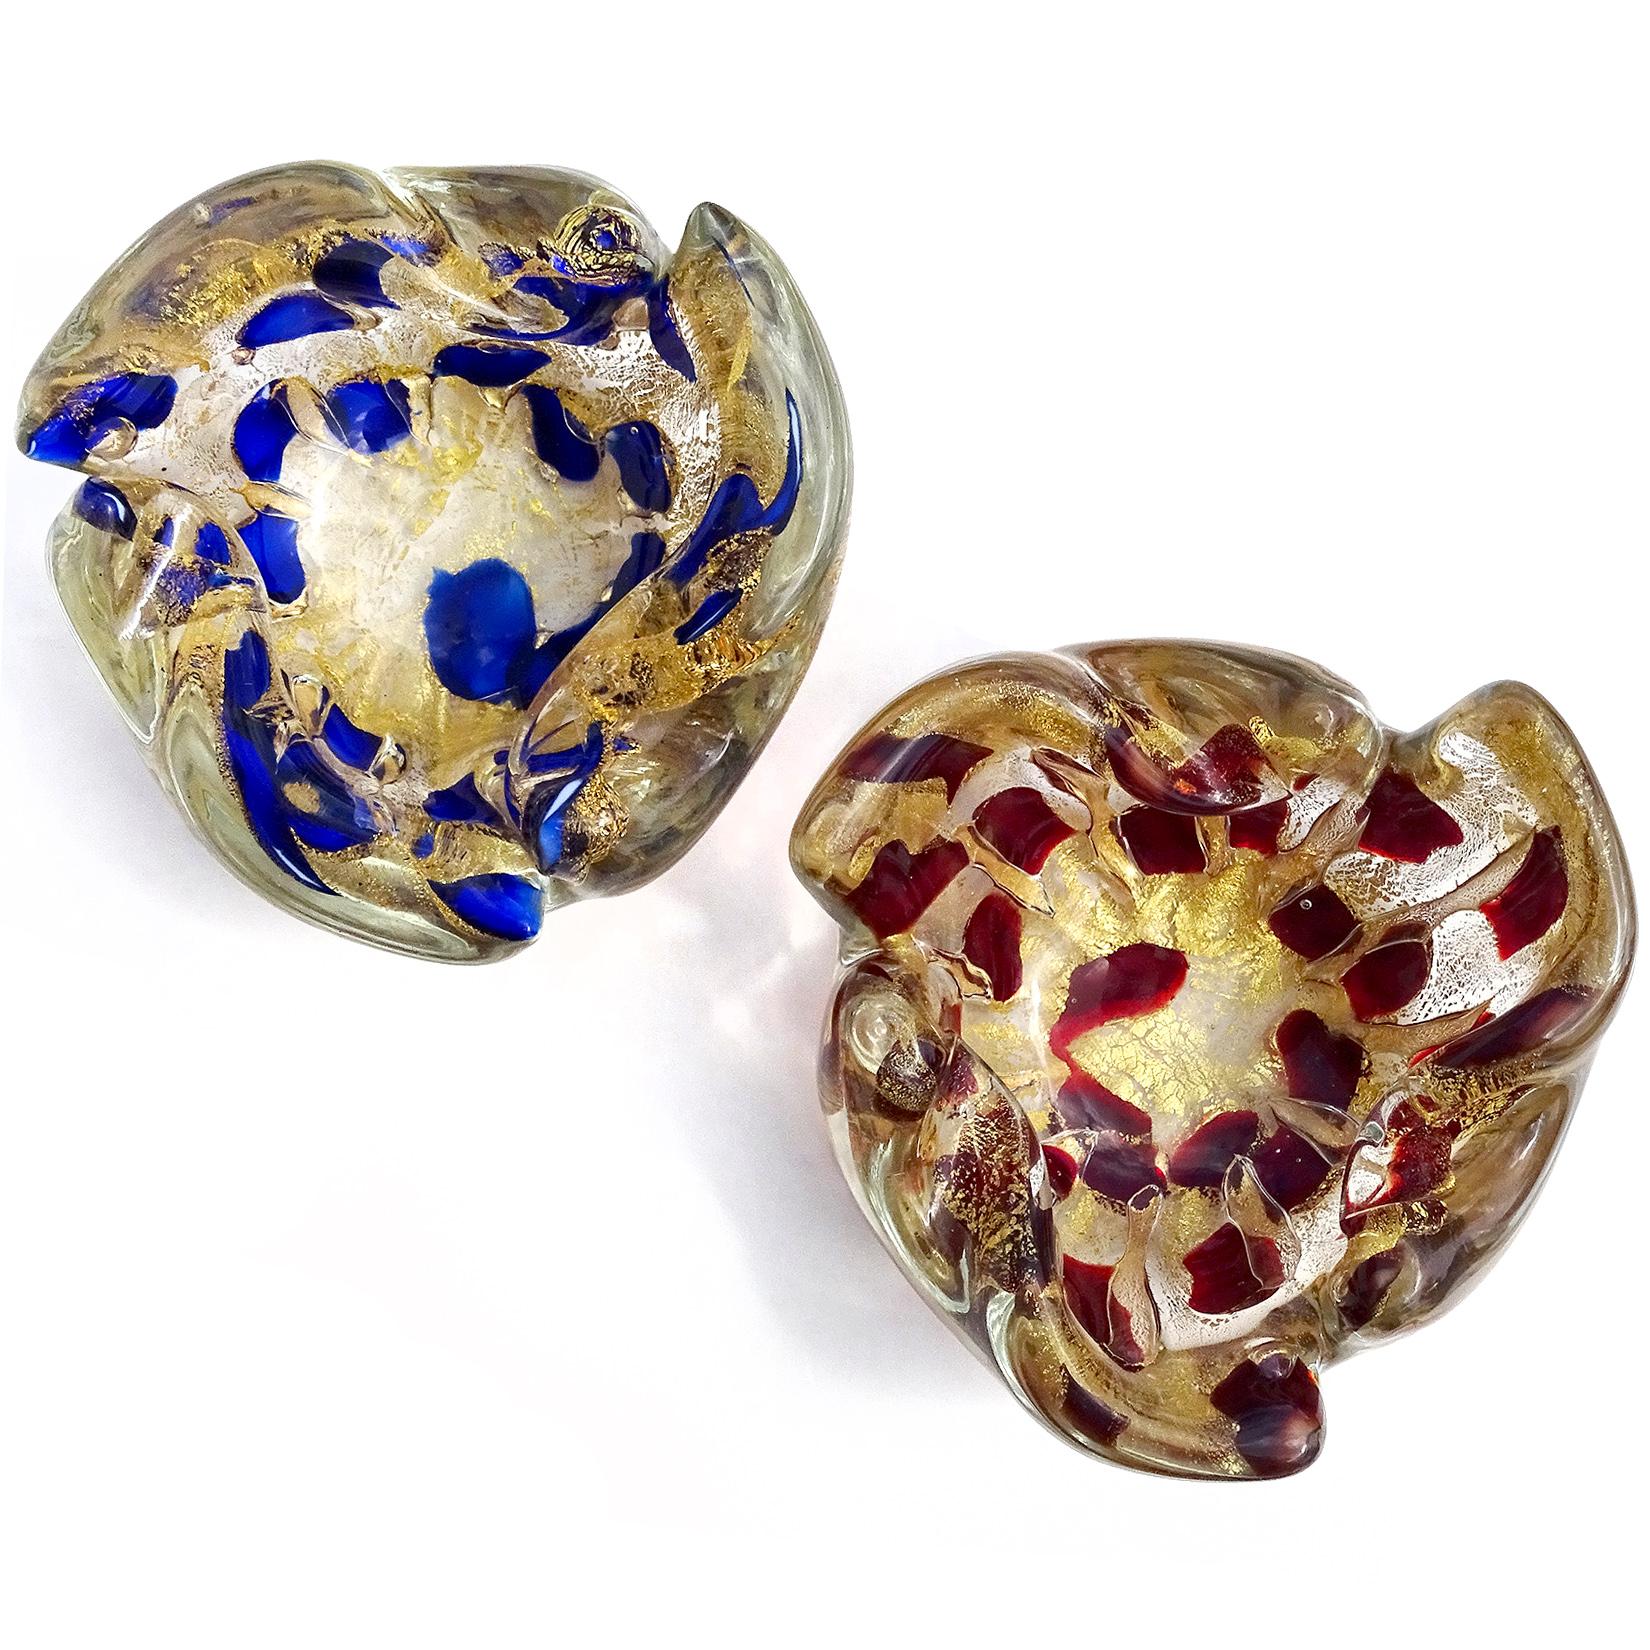 Priced per item (2 colors available as shown). Beautiful vintage Murano hand blown gold flecks Italian art glass bowl or ashtray. Documented to the Barovier e Toso Company. One decorated with cobalt blue color spots, and the other with dark red. The